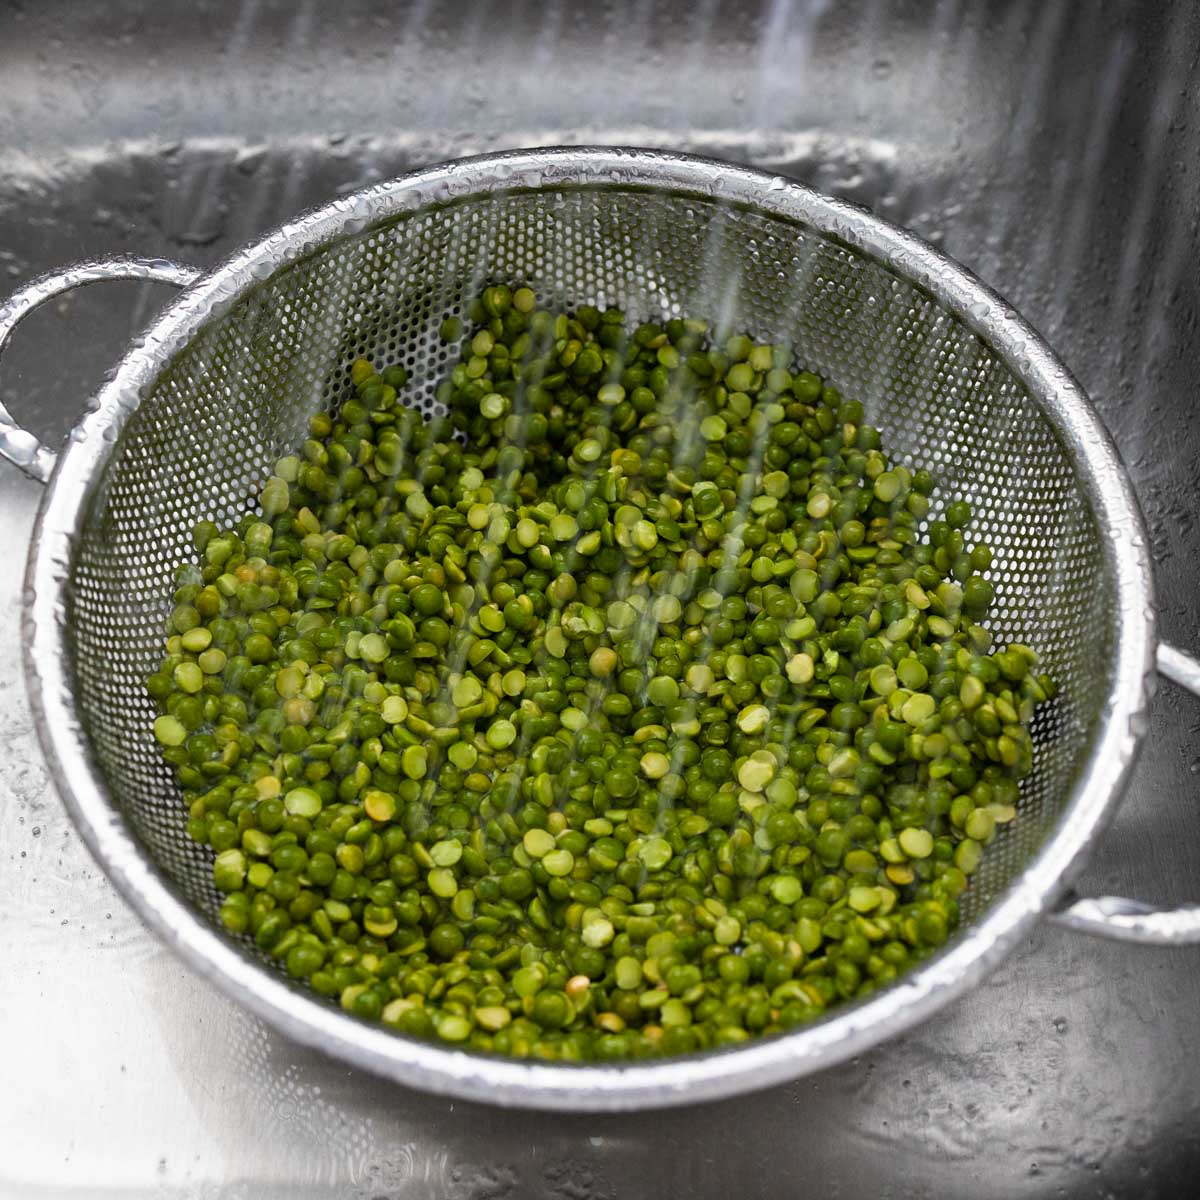 The peas are in a strainer in the sink. Water is rinsing them off.